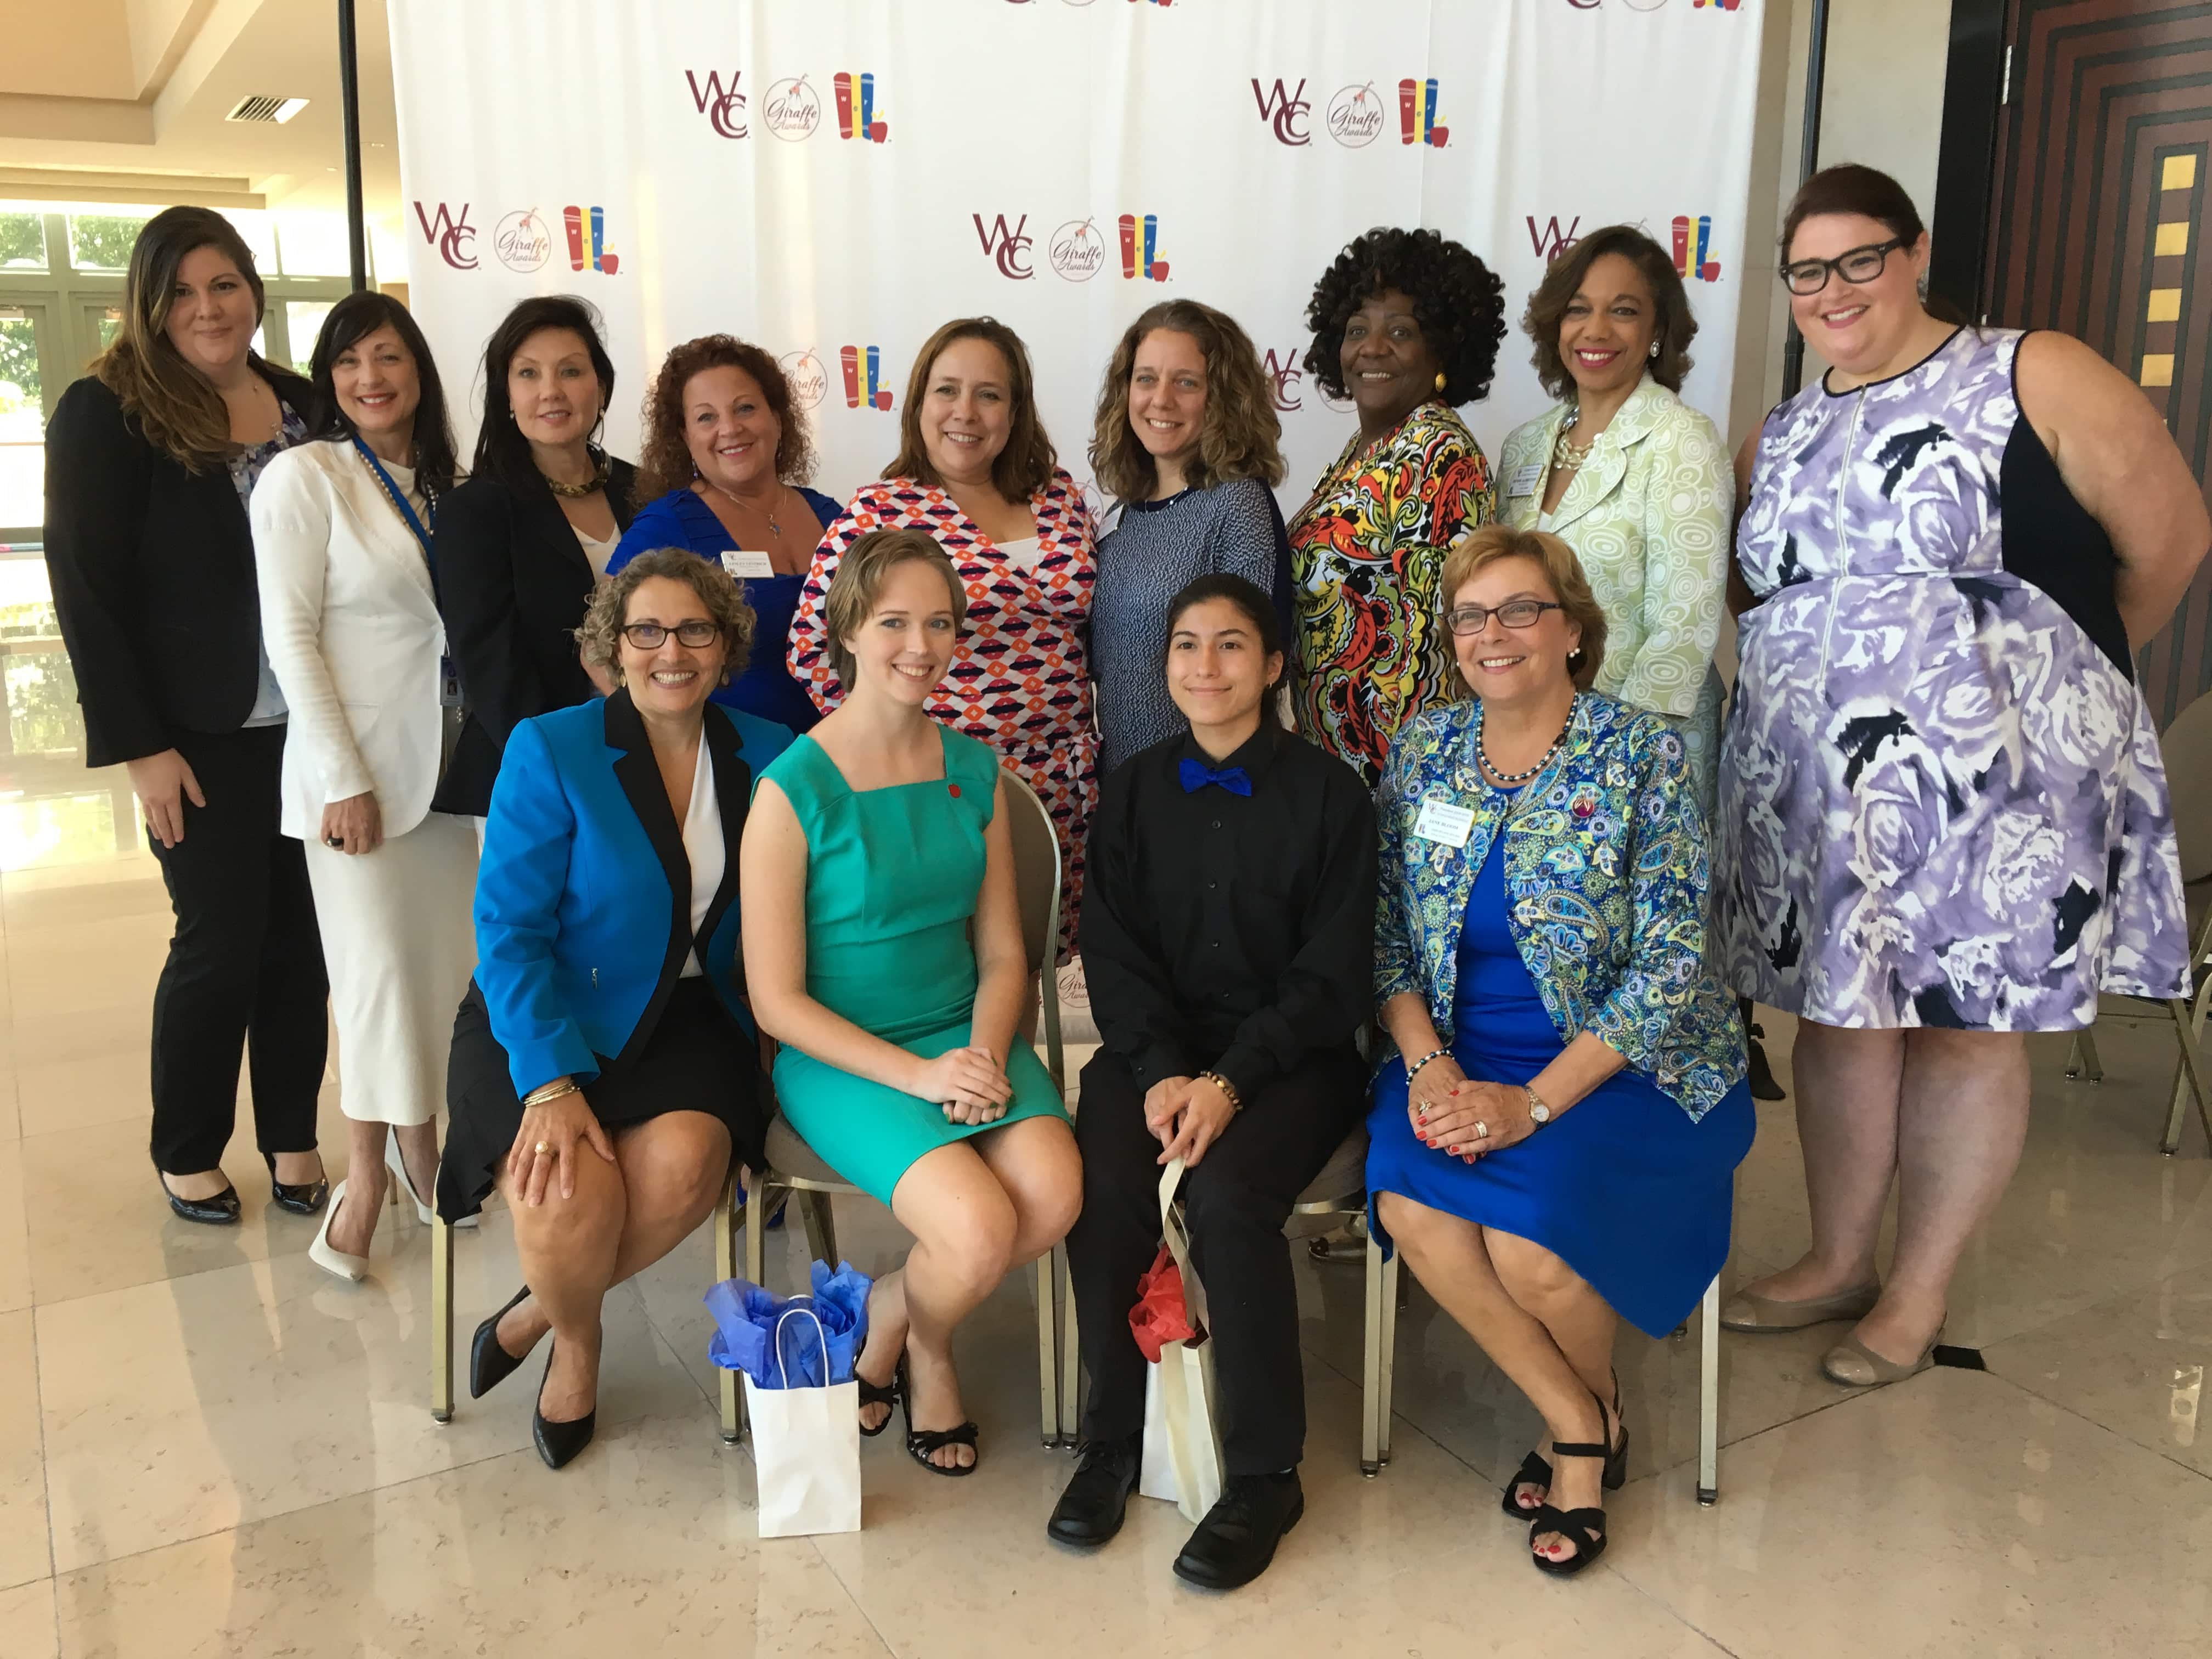 Keiser University was a Proud Attendee at the 13th Annual “Linking Women to Learning” Scholarship Luncheon Hosted by the Women’s Chamber of Commerce of Palm Beach County